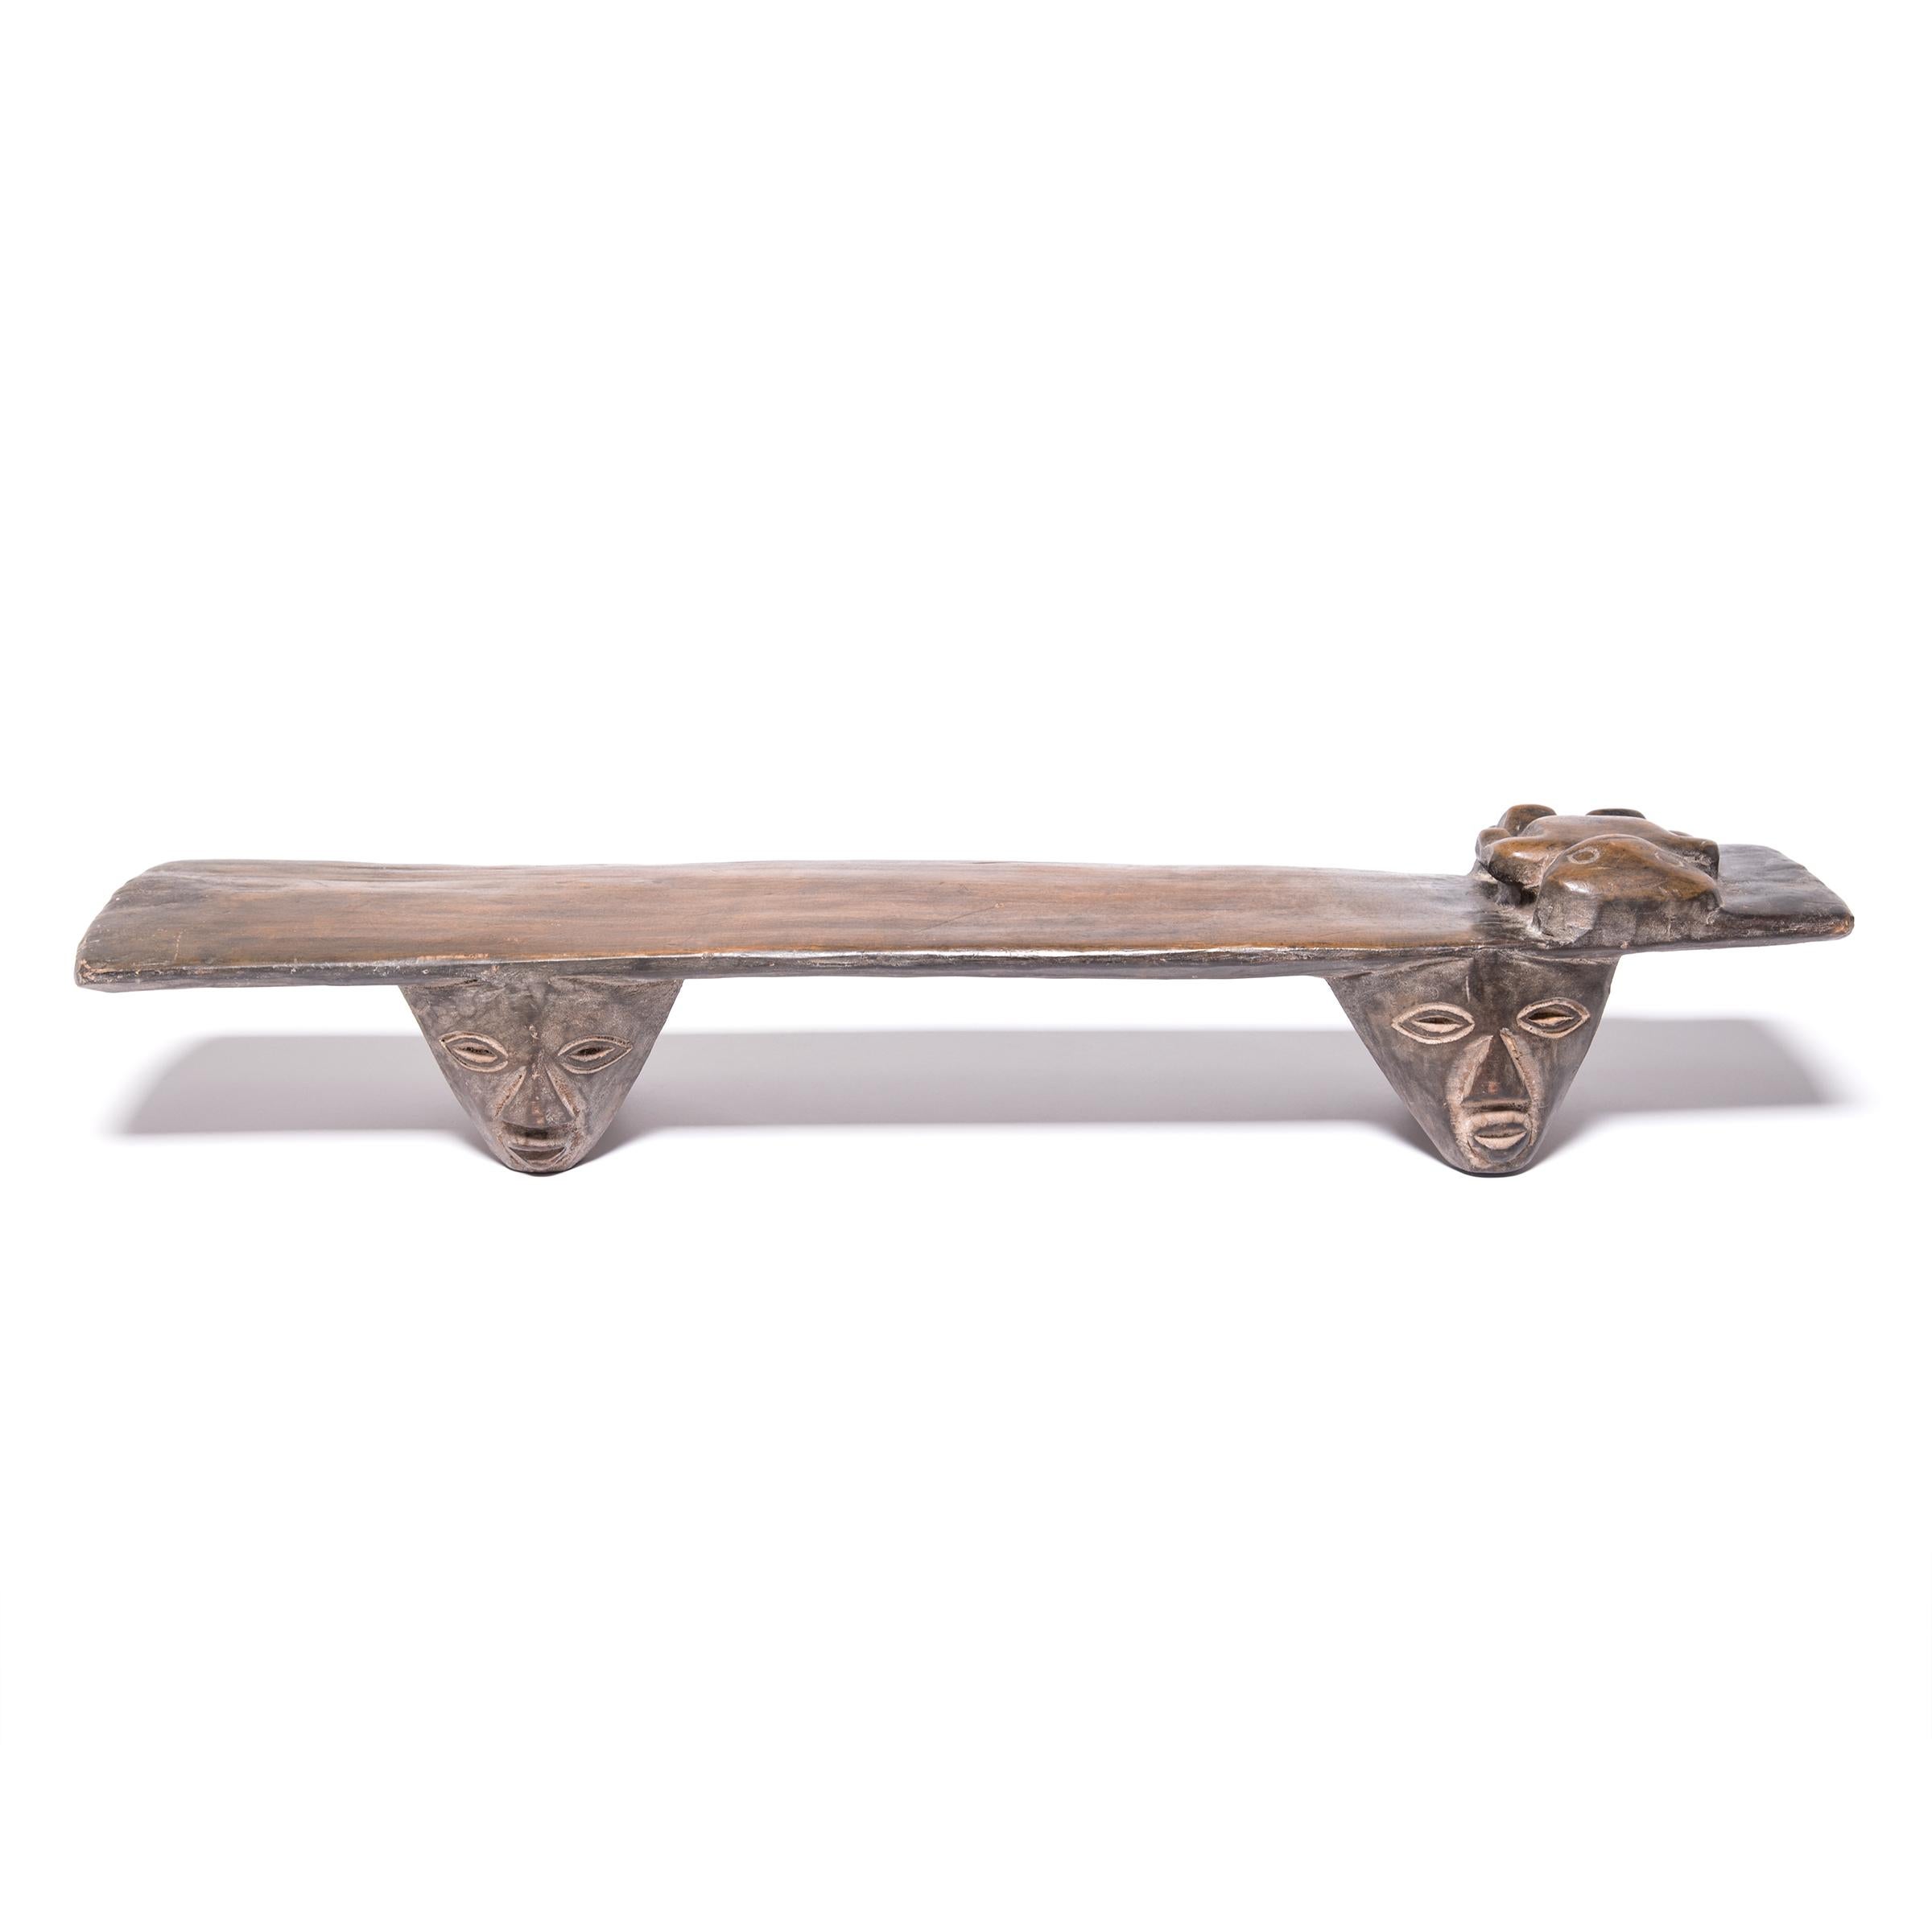 Ivorian African Wooden Stand with Figurative Headrest